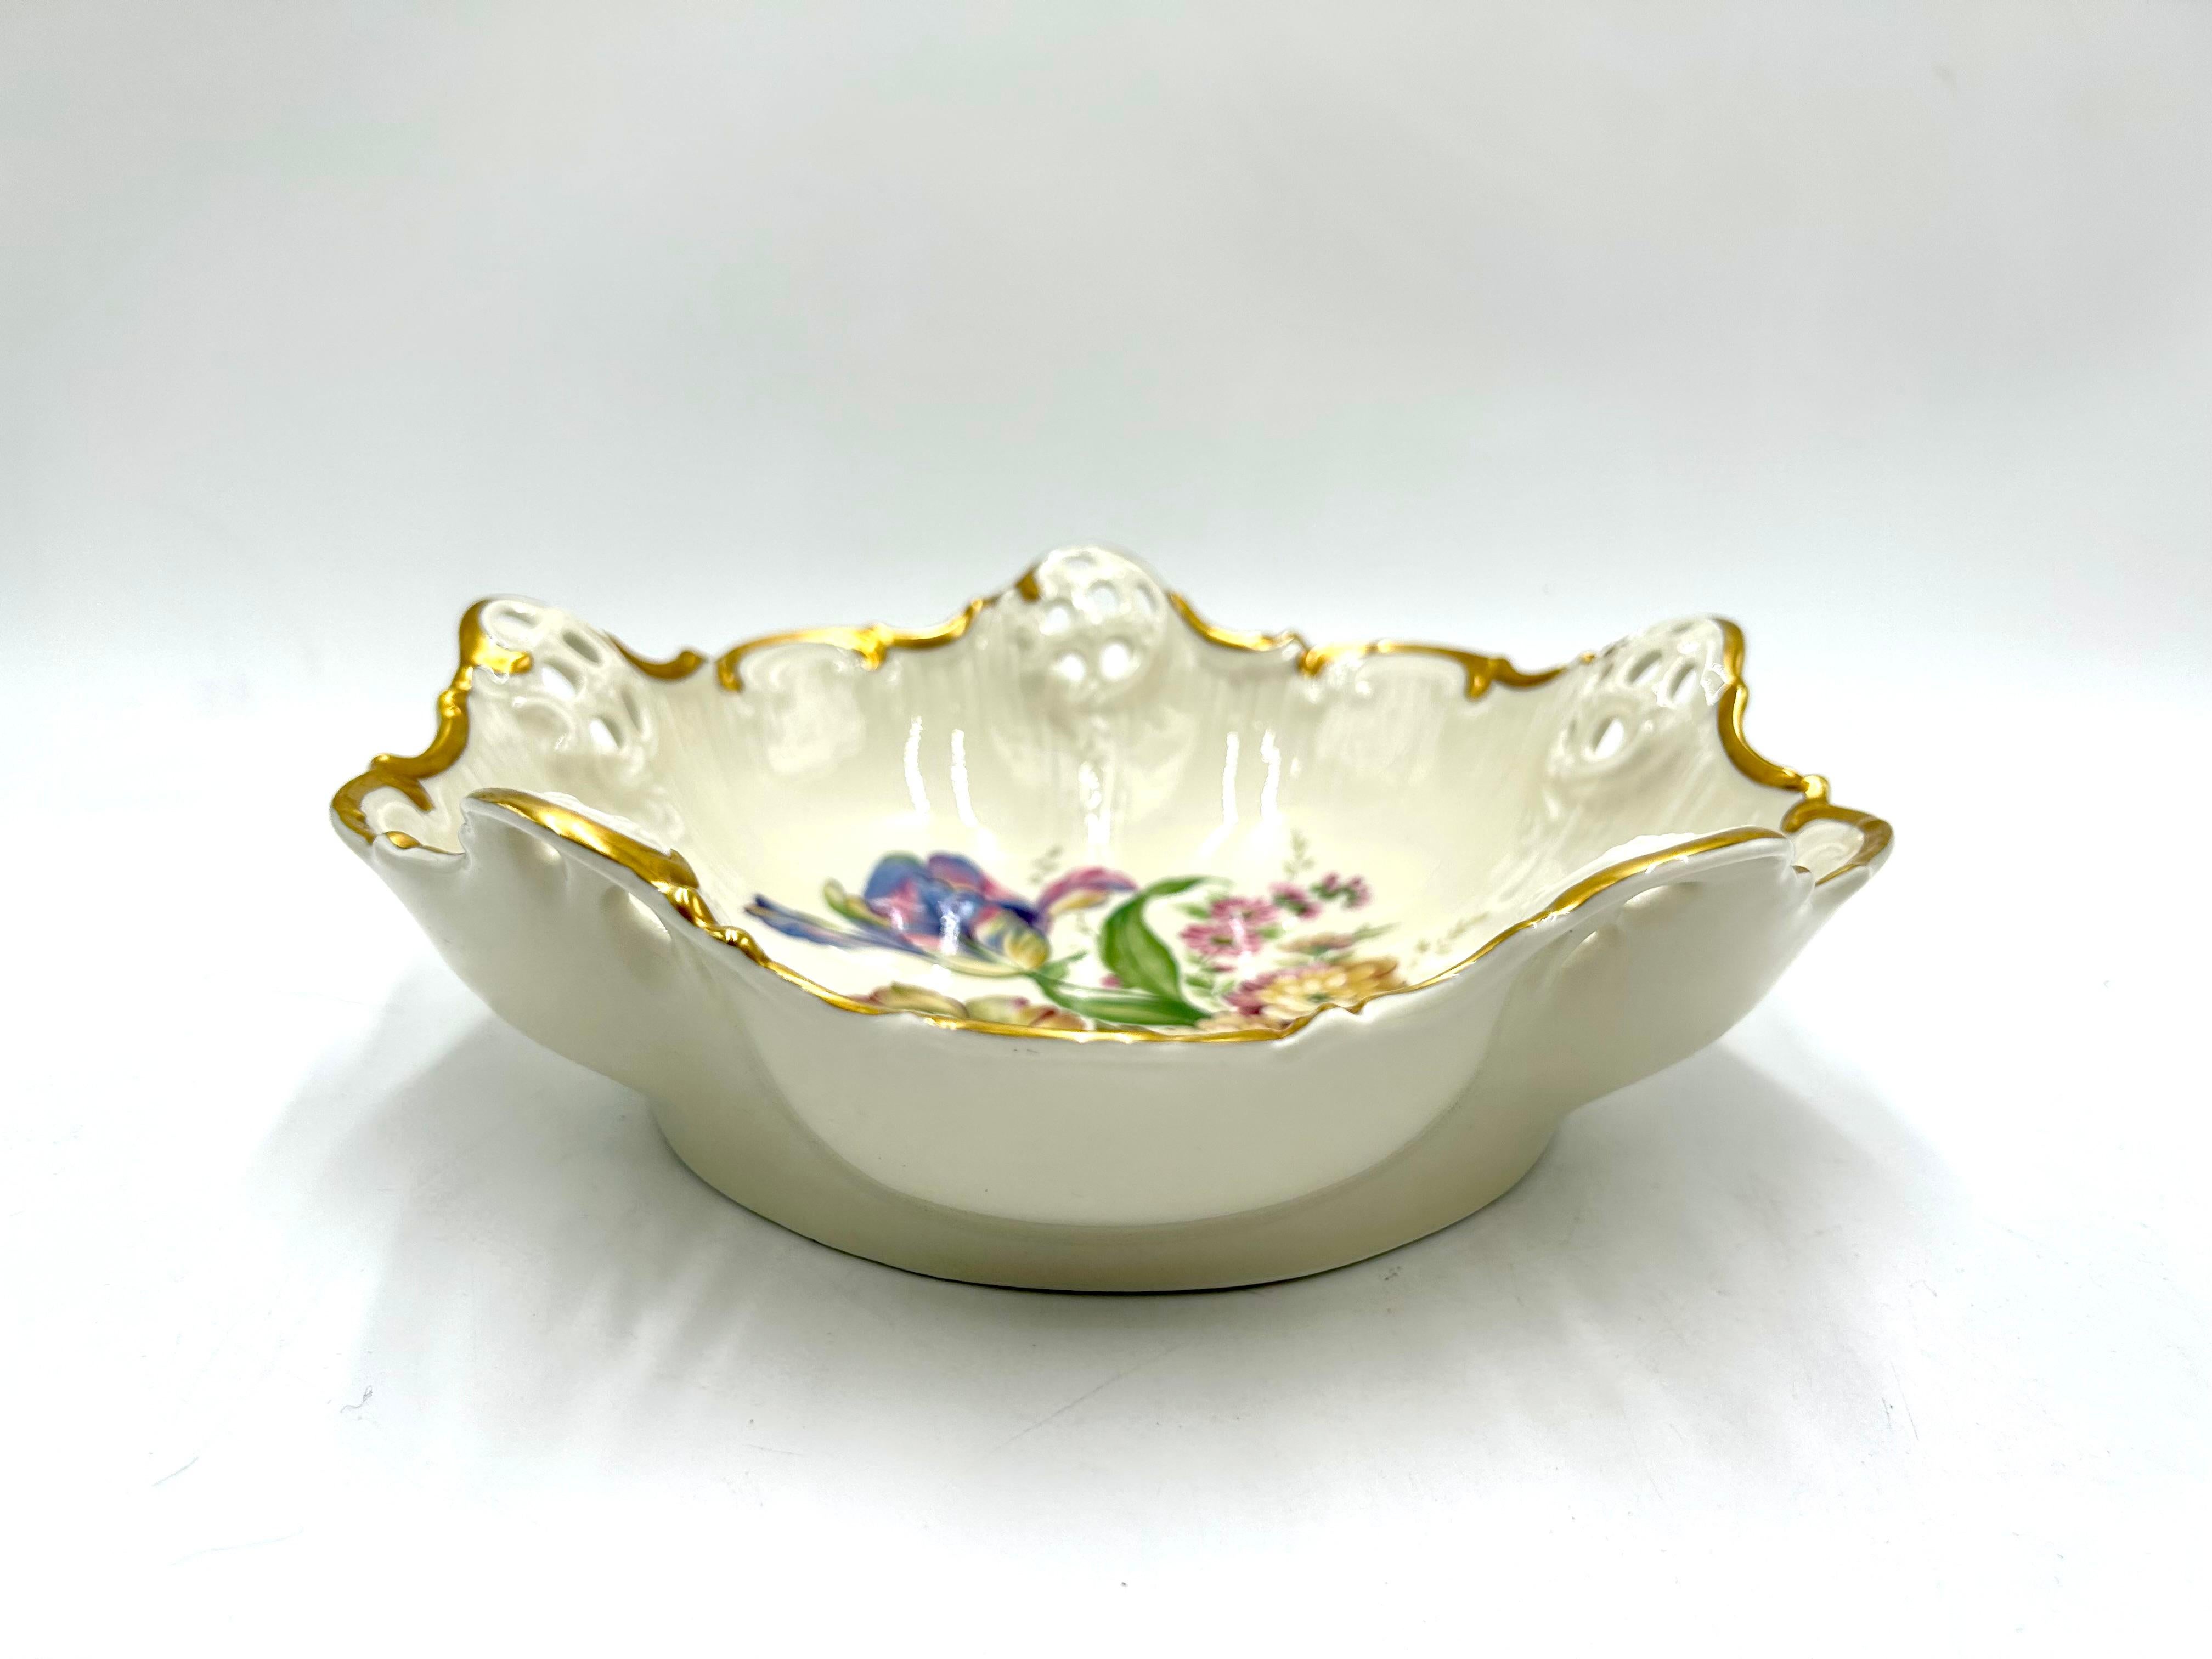 Porcelain openwork bowl made of ecru porcelain, decorated with gilding and a bouquet of flowers motif. A product of the valued German manufacturer Rosenthal from the Moliere series with the Millefleurs decoration pattern. Signed with the mark used